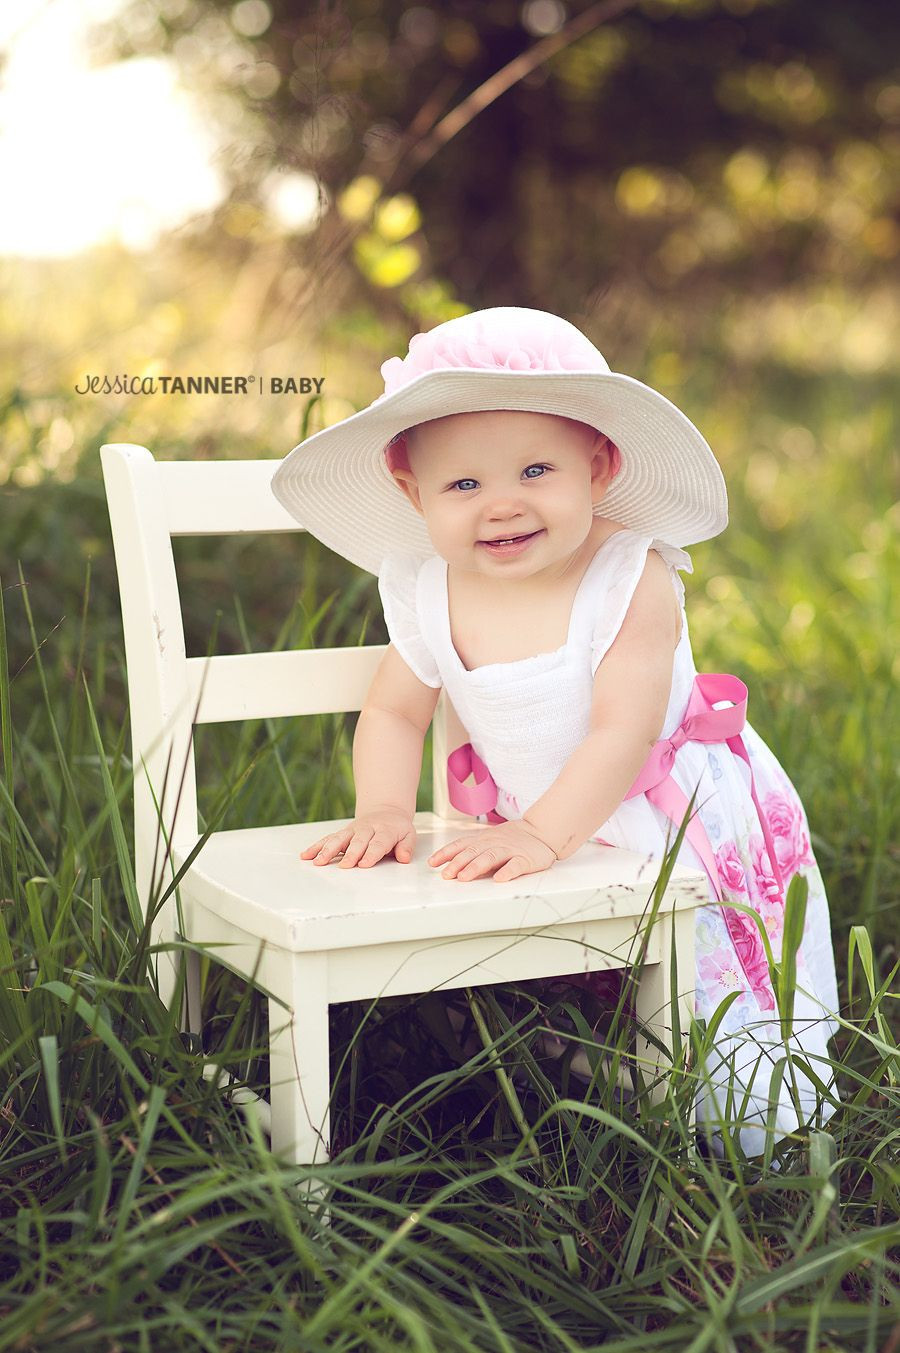 Gift Ideas For 8 Month Old Baby Girl
 8 Month Old baby clickaway adorable pictures